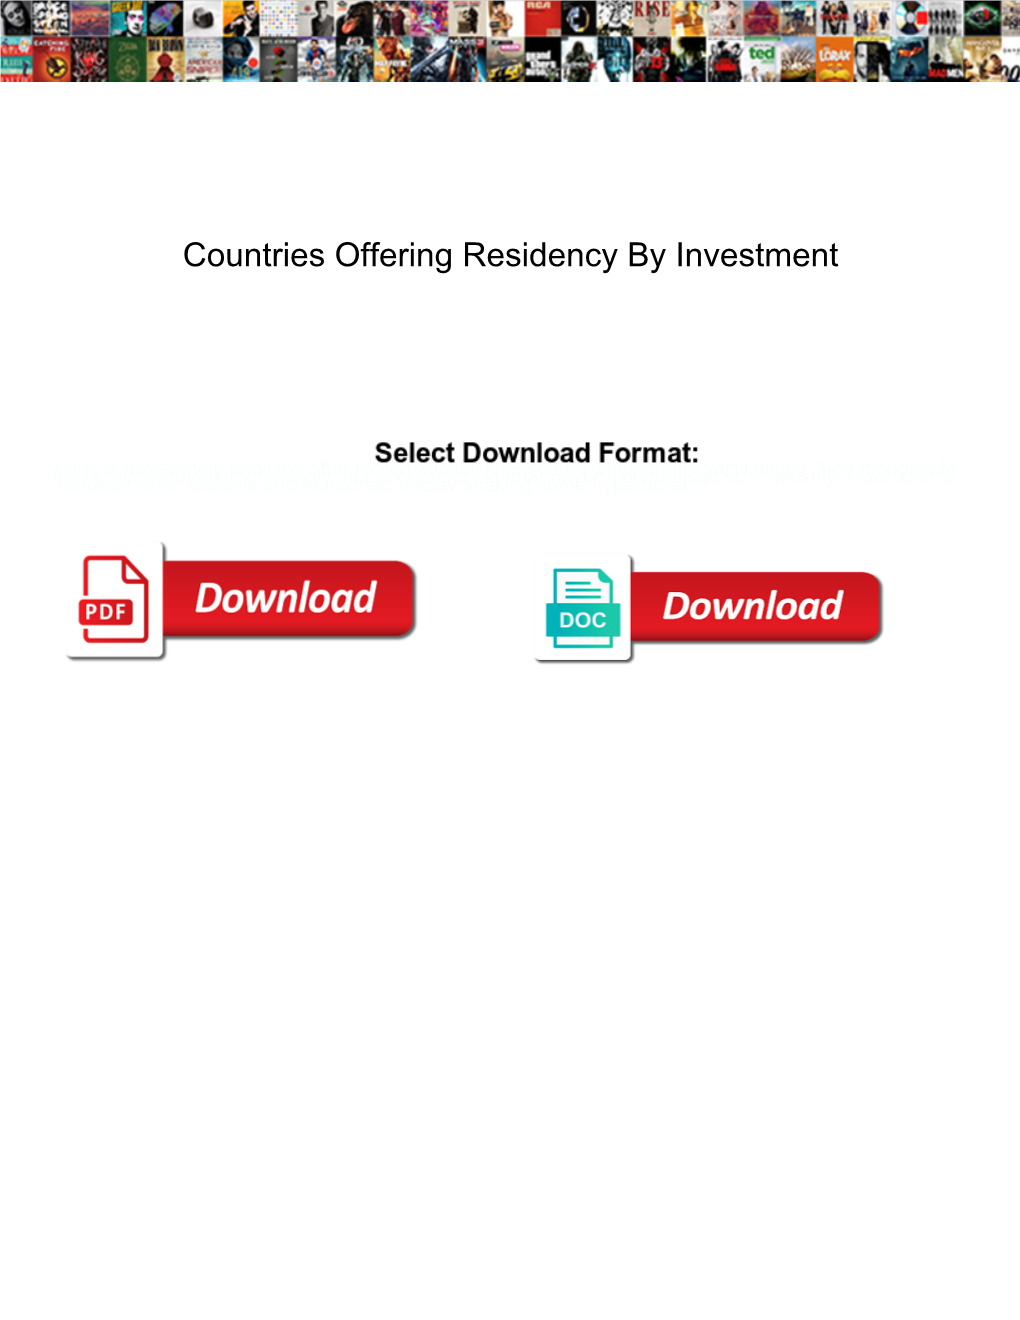 Countries Offering Residency by Investment